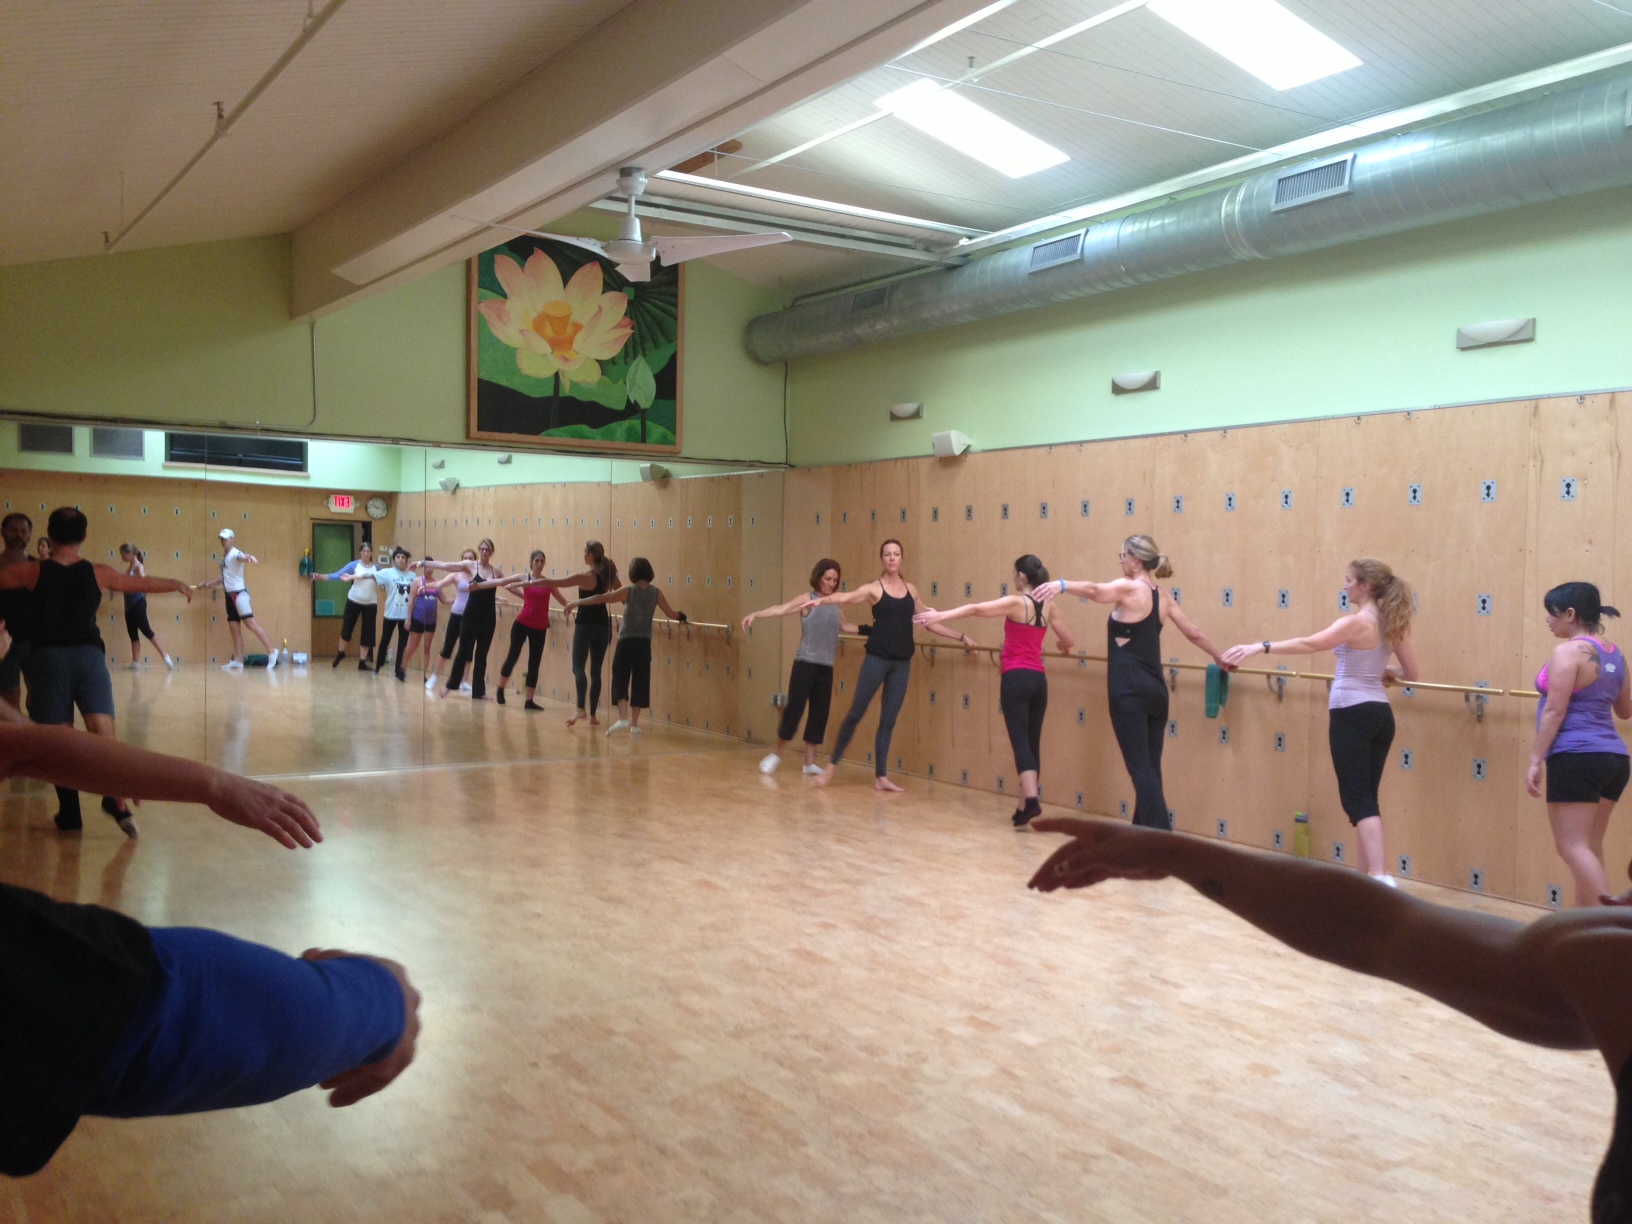 Our business manager Vlad Glouchkov leads ballet barre class